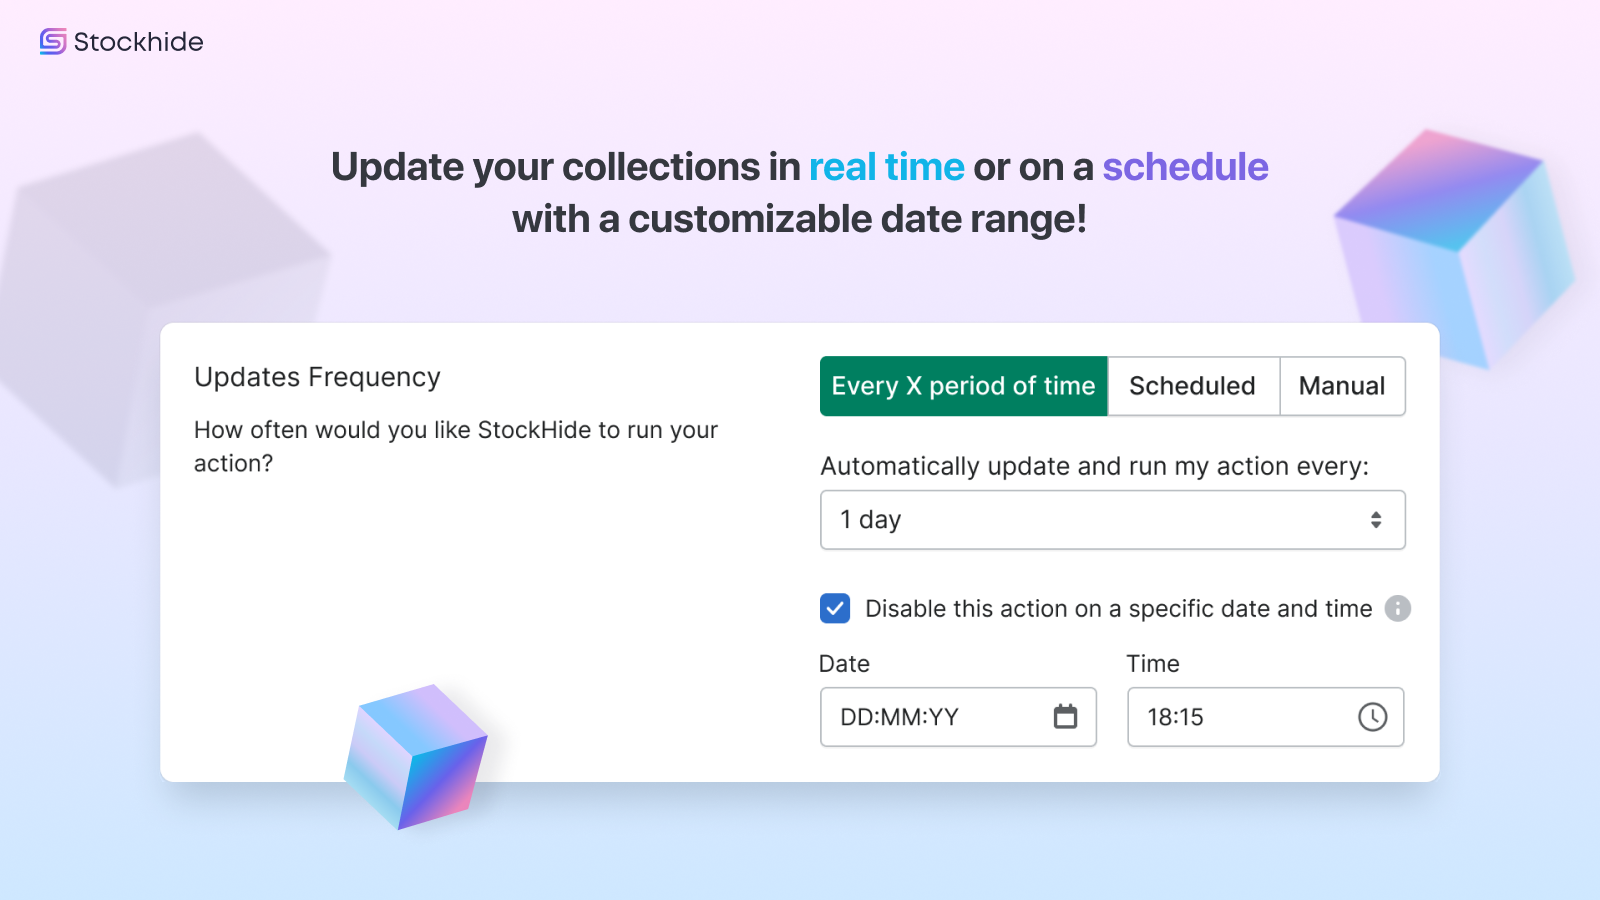 Update collections in real time or on a schedule & date range